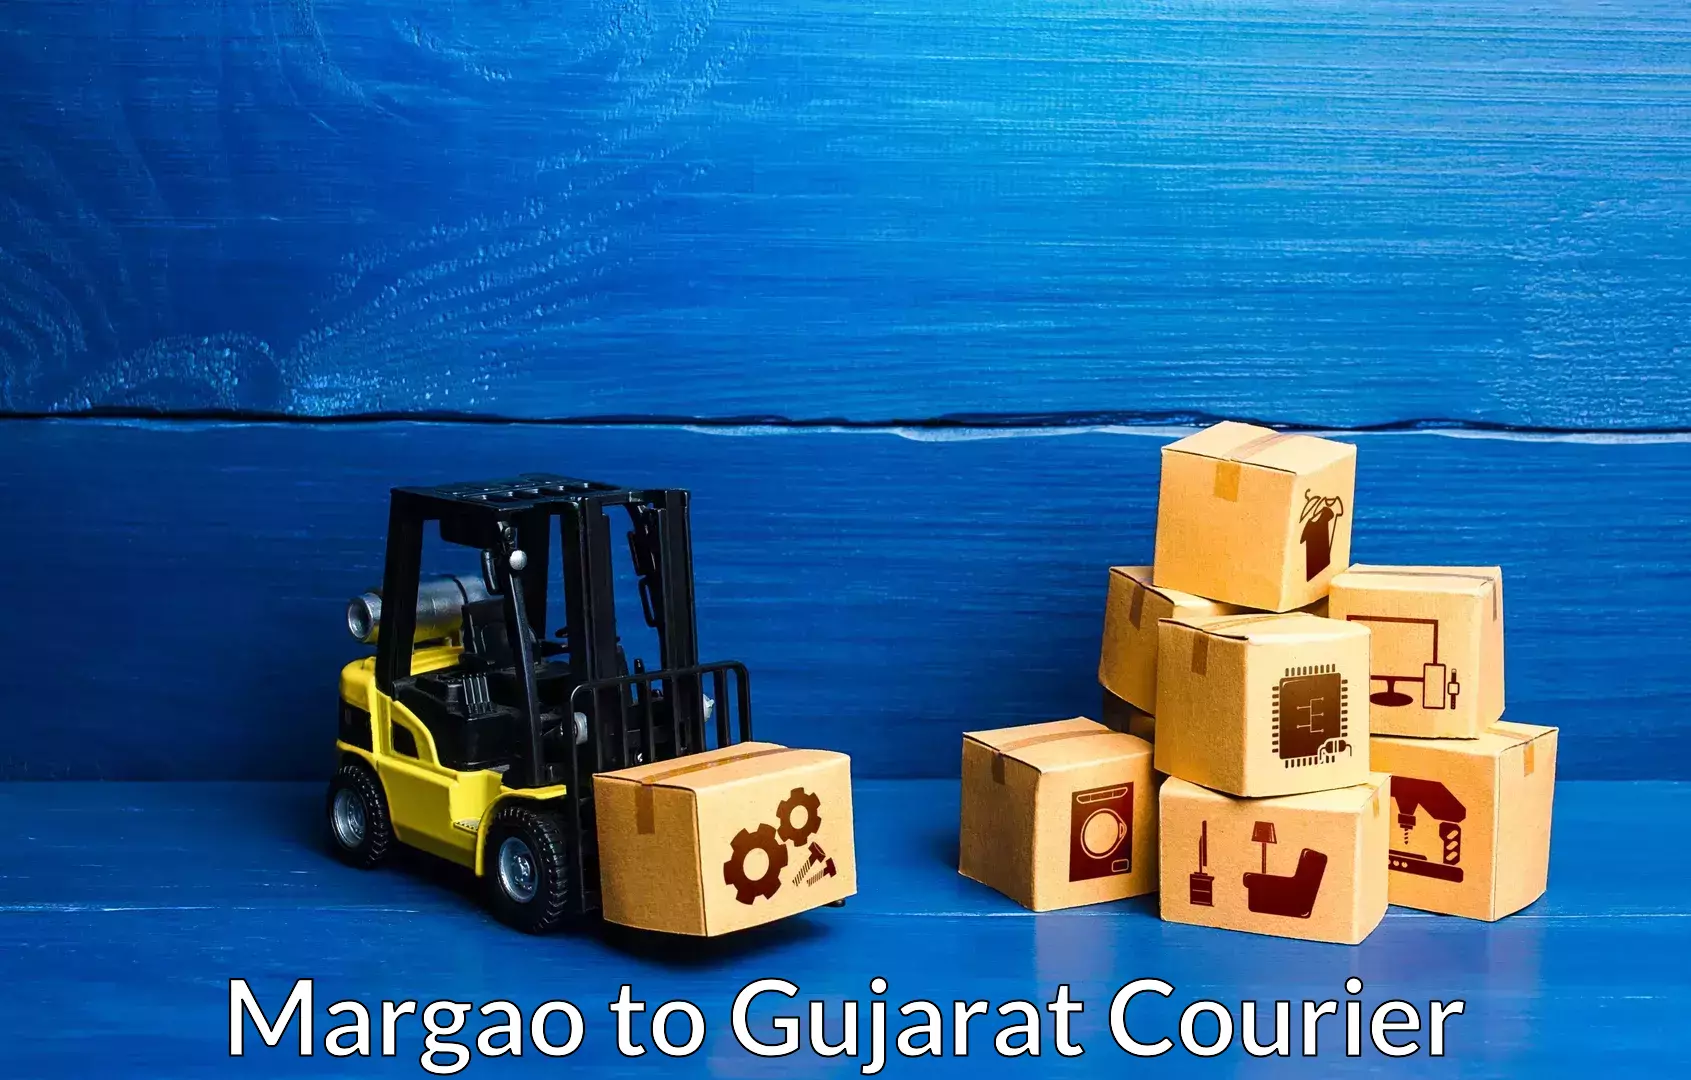 Trusted relocation experts Margao to Gujarat